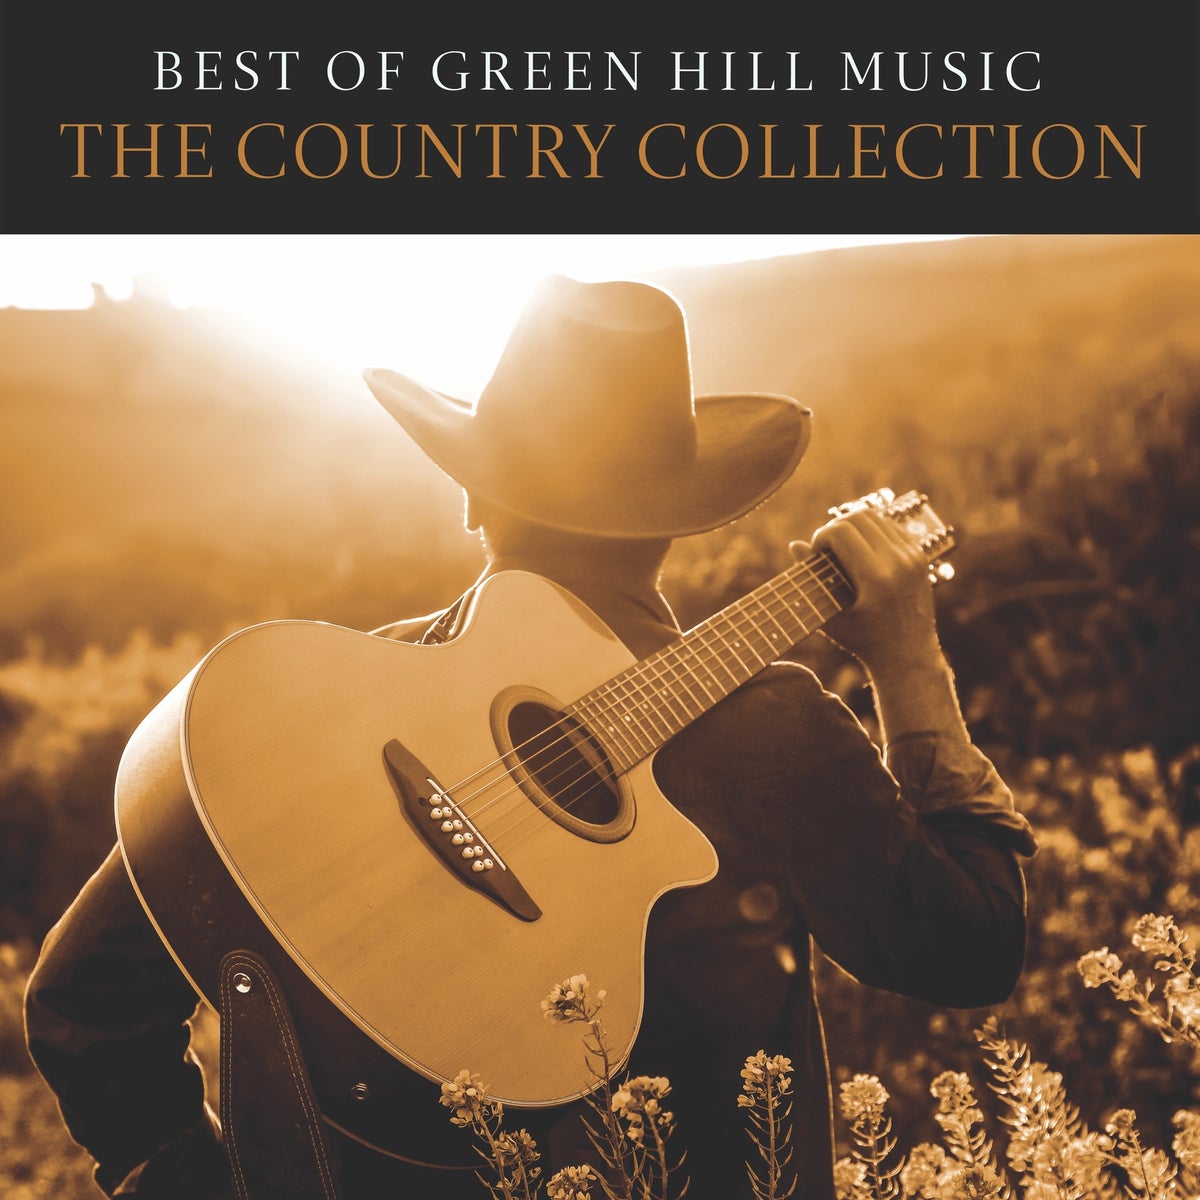 Best of Green Hill Music: The Country Collection